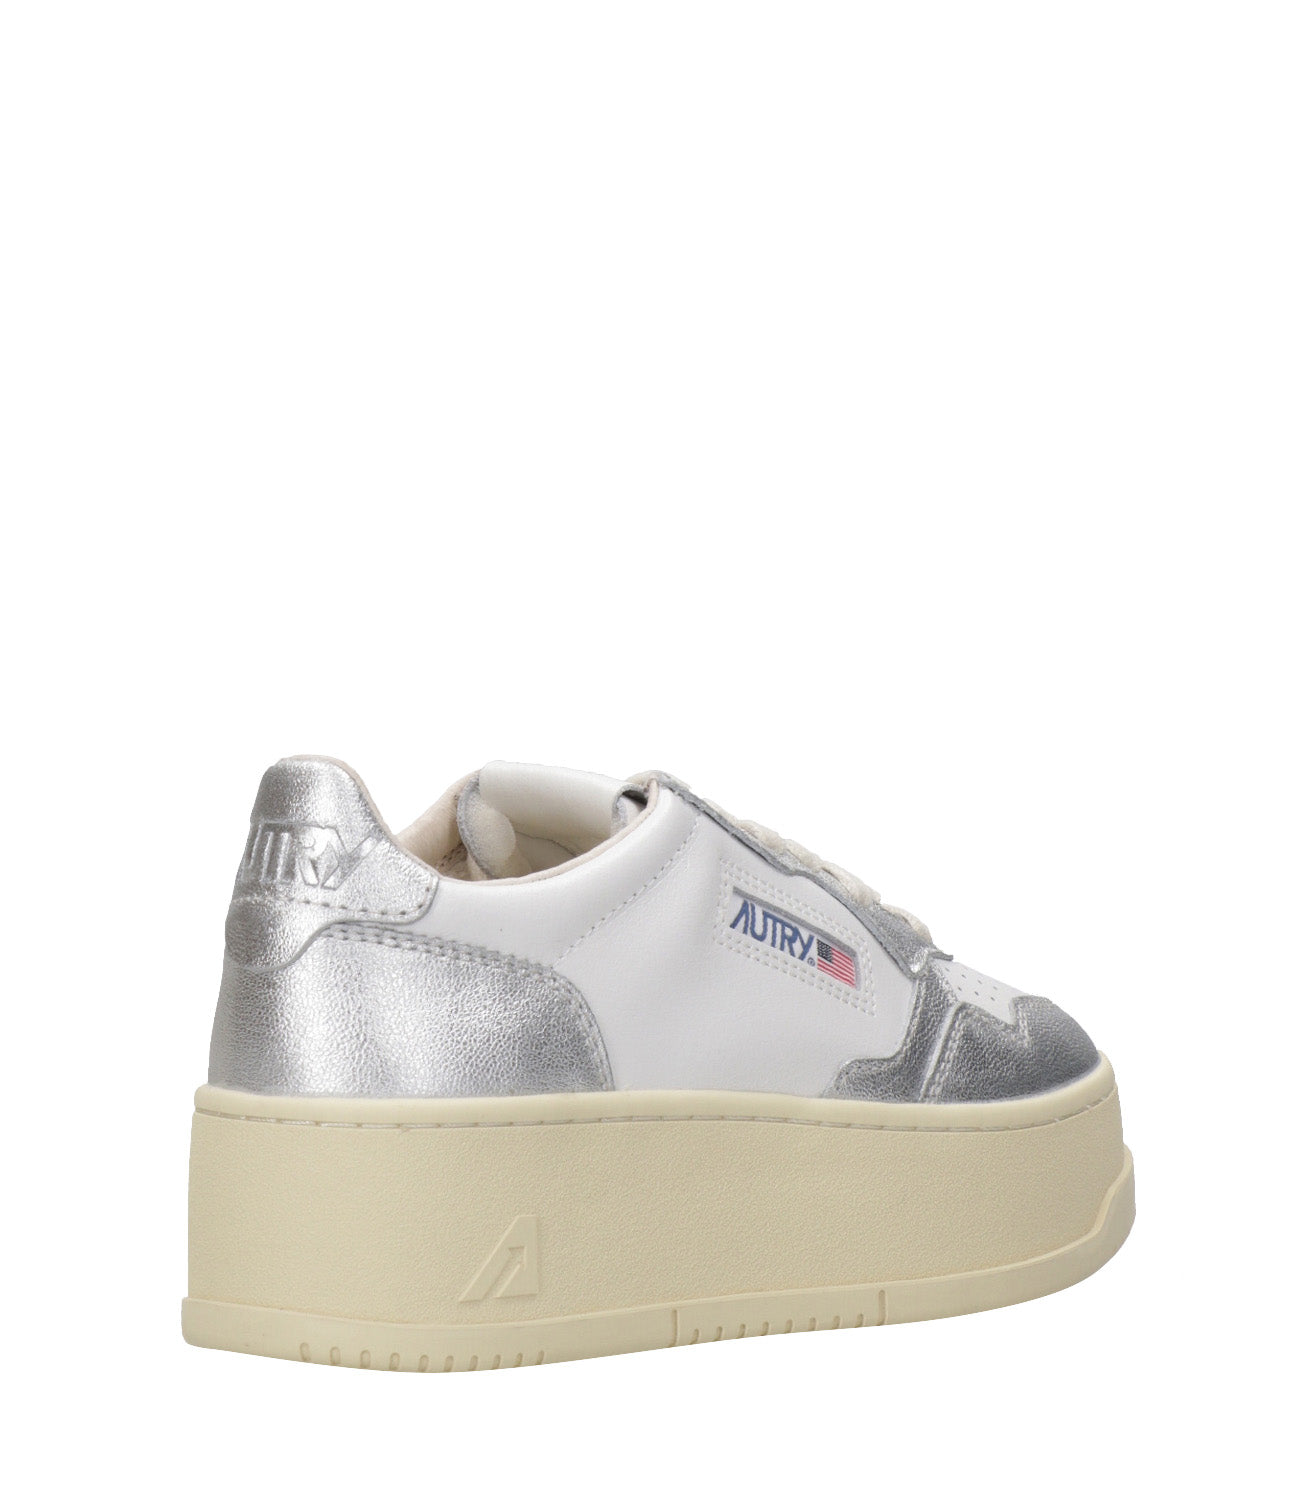 Autry | Platform Low White and Silver Sneakers